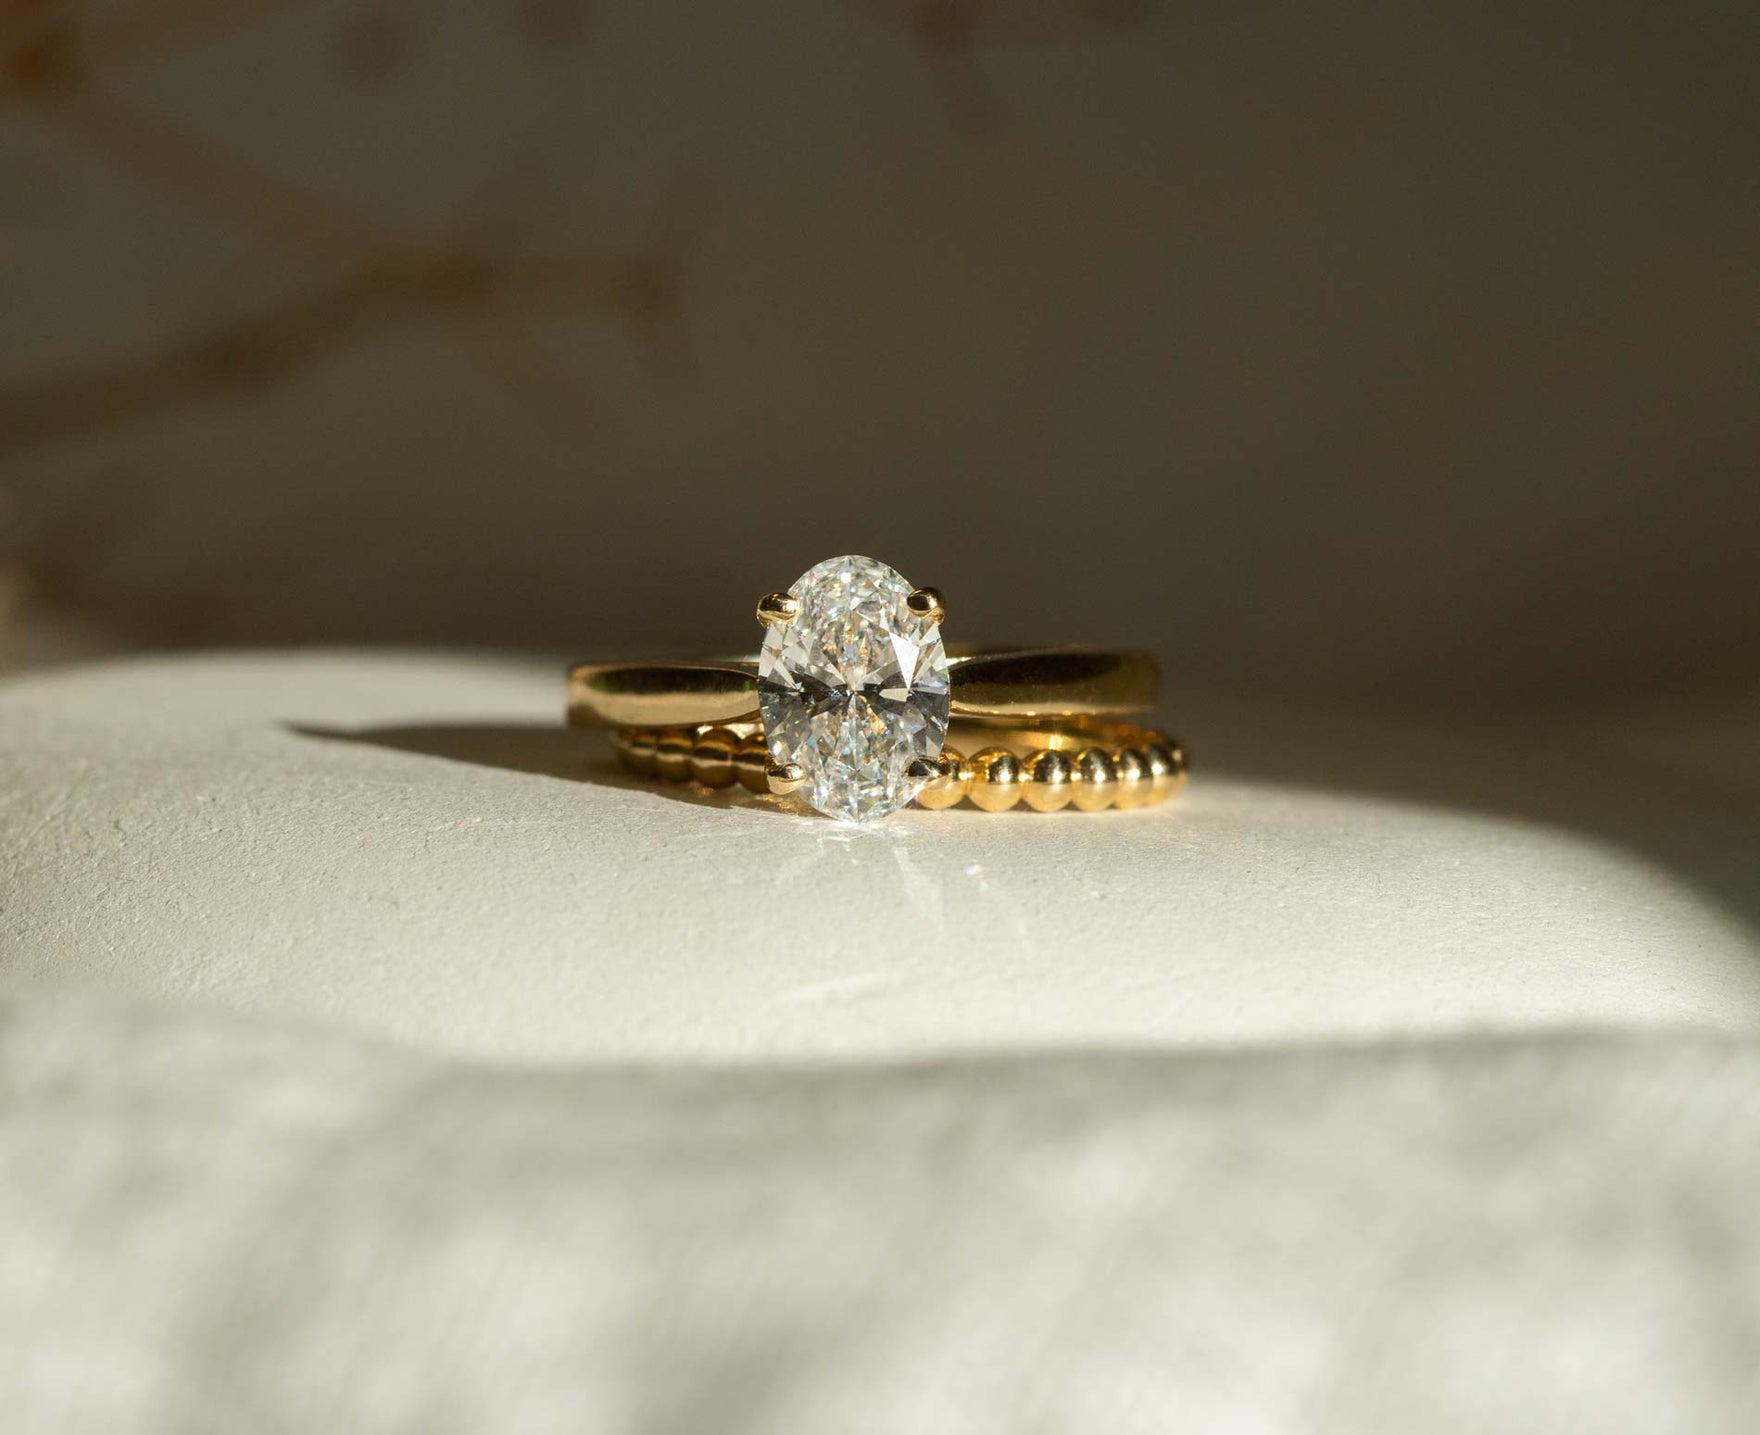 Tips on Buying an Engagement Ring